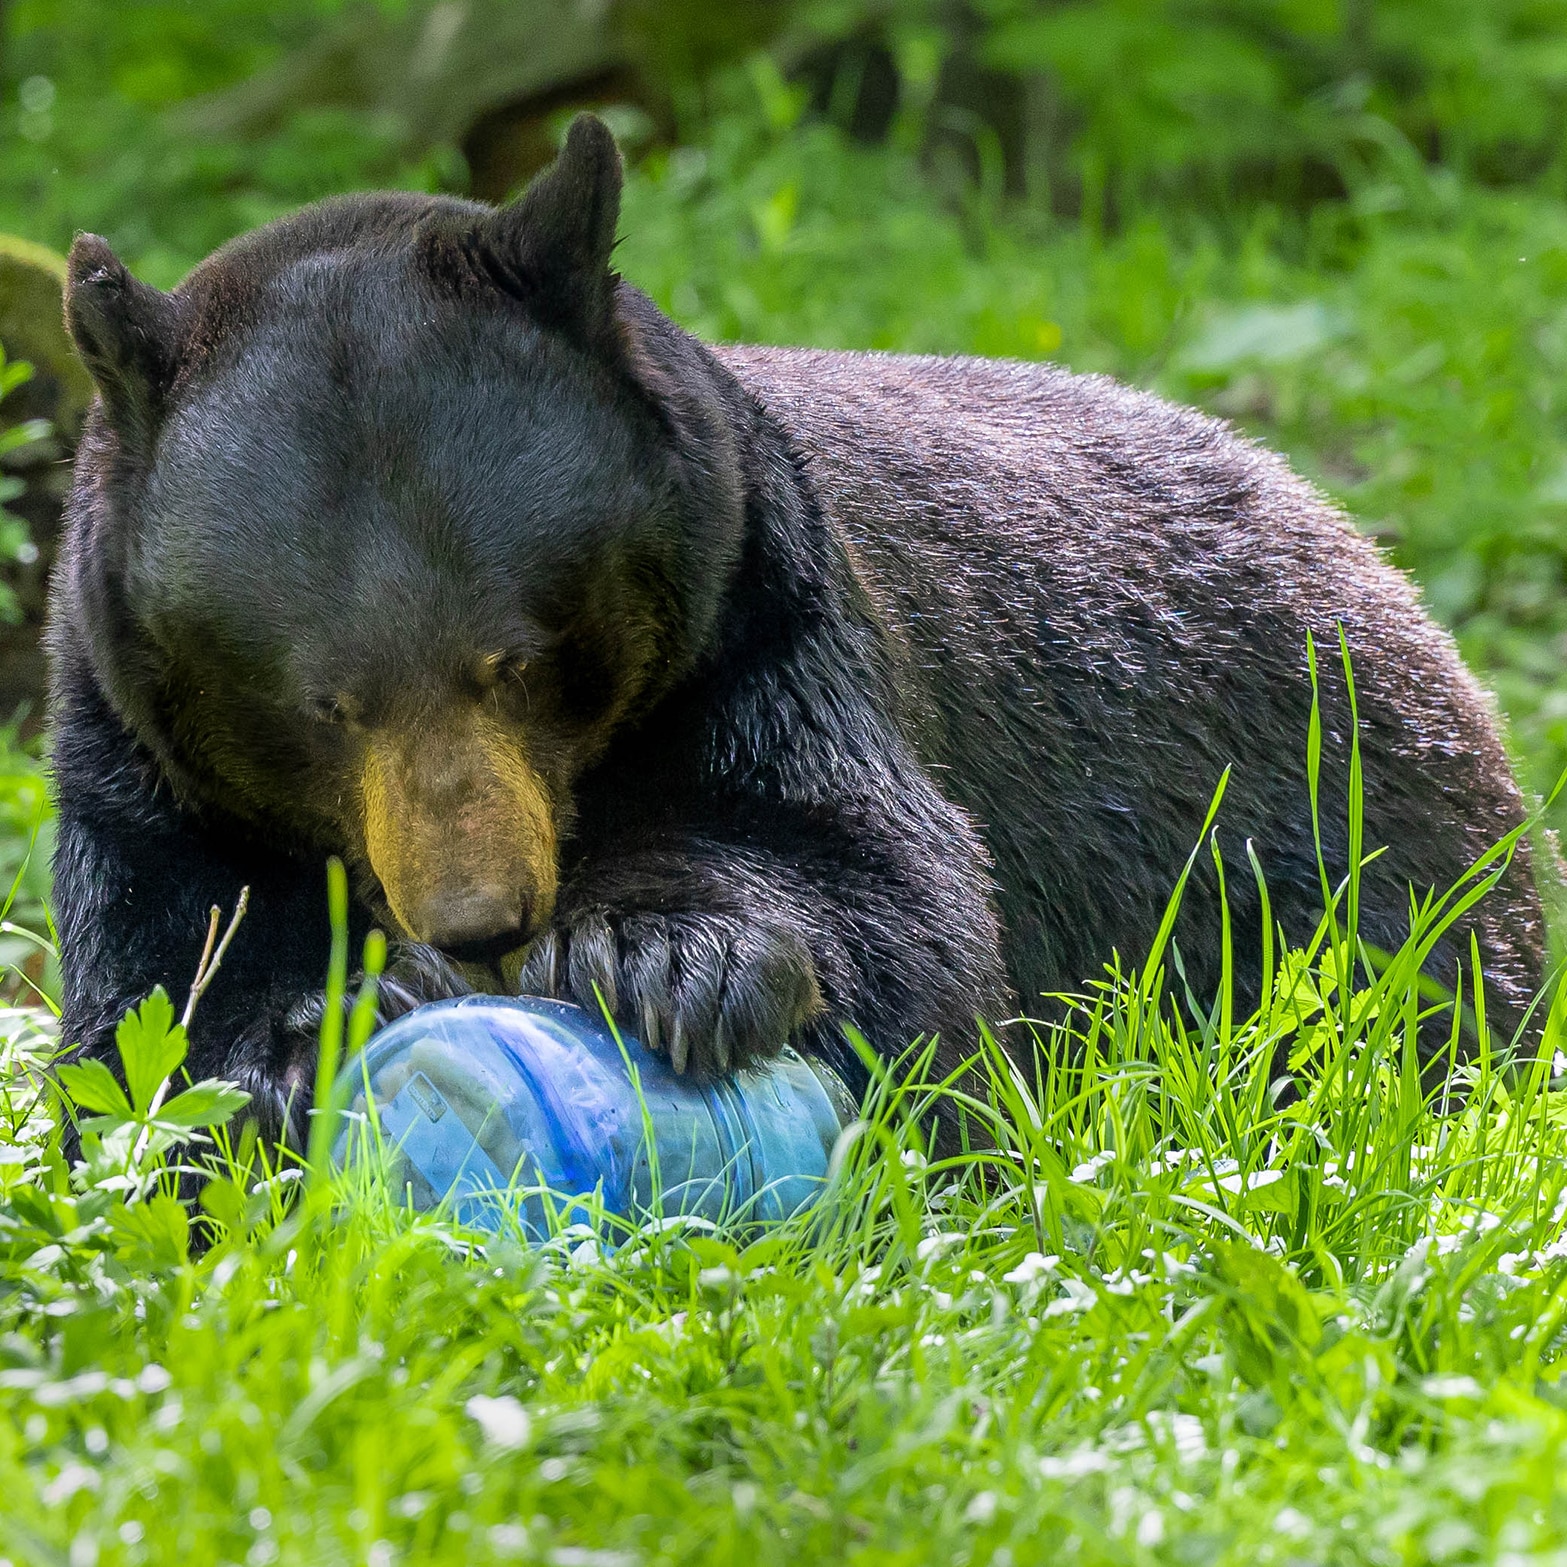 A black bear laying in a grassy field tries to figure out how to open a bear canister.